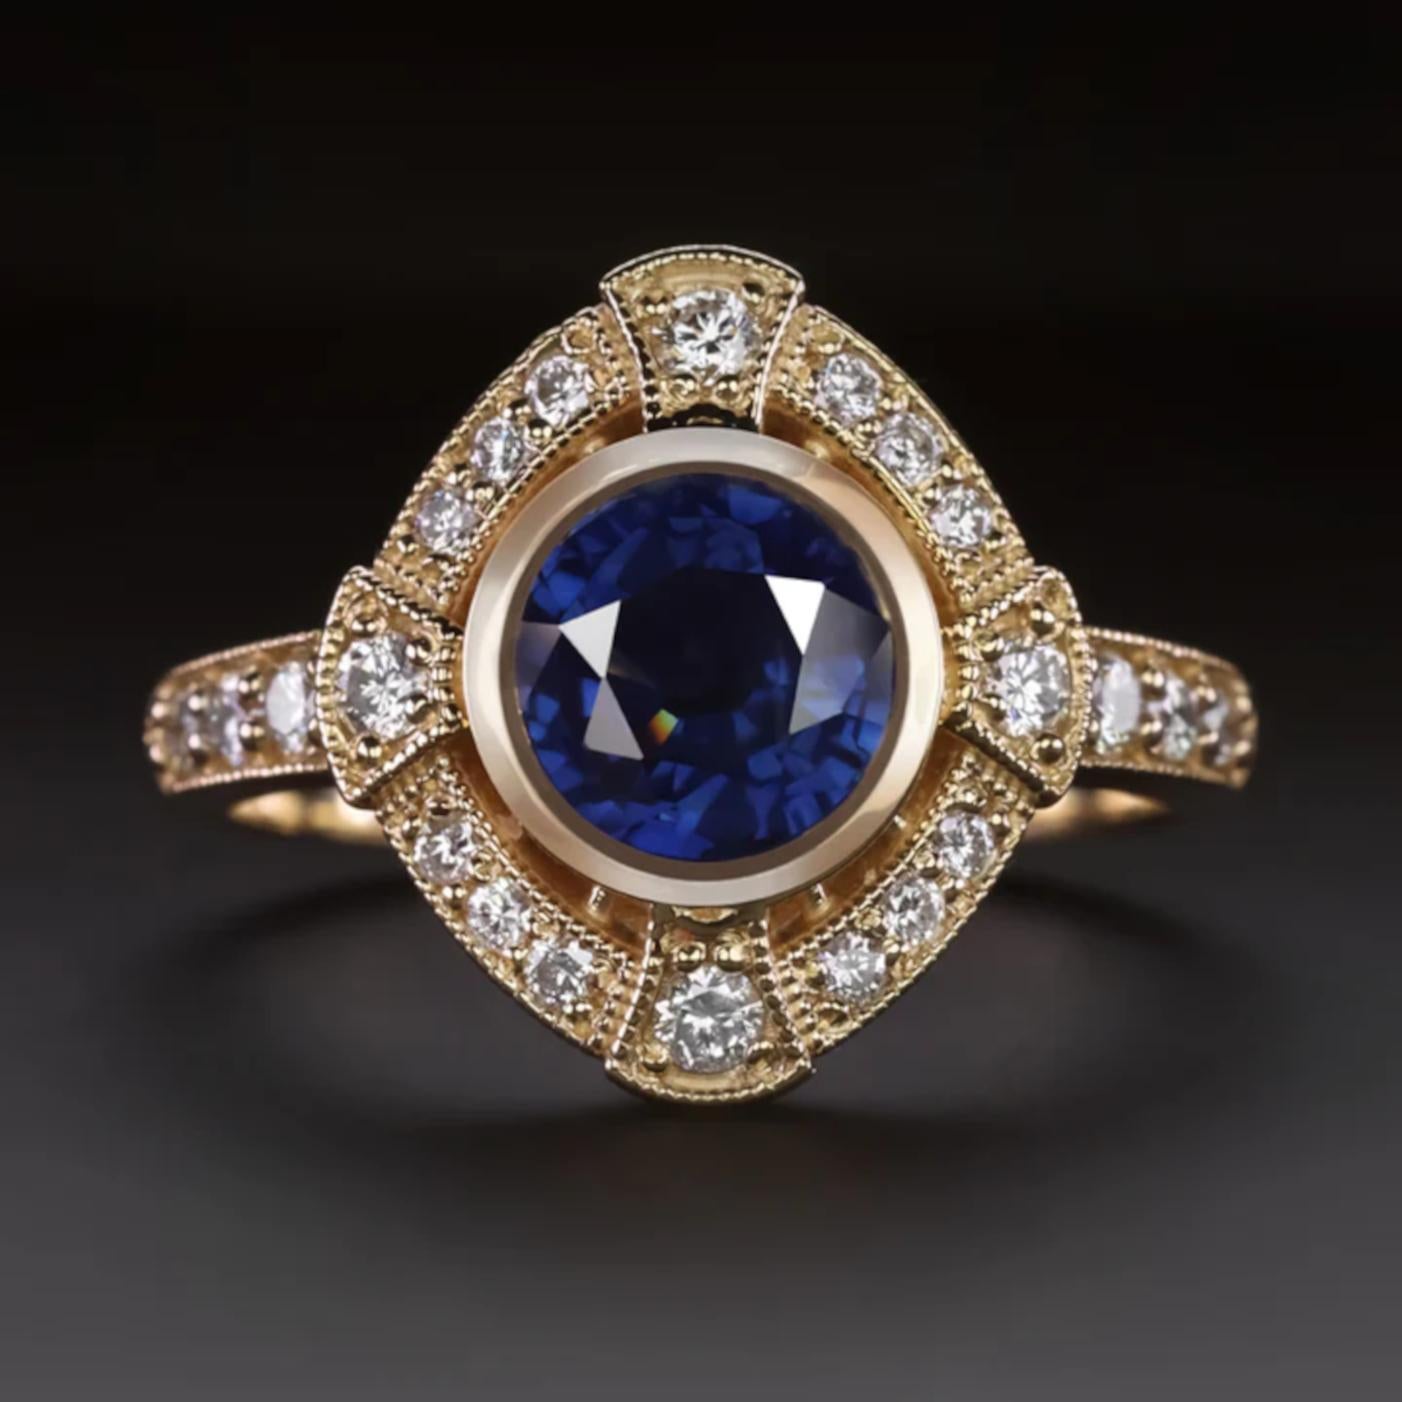 Sapphire and diamond cocktail ring.
The main stone is a rich blue sapphire surrounded by an halo of diamonds! 
The Art Deco style setting is made in solid 14k yellow gold.

- 1.75ct natural sapphire

- 0.37ct accent diamonds